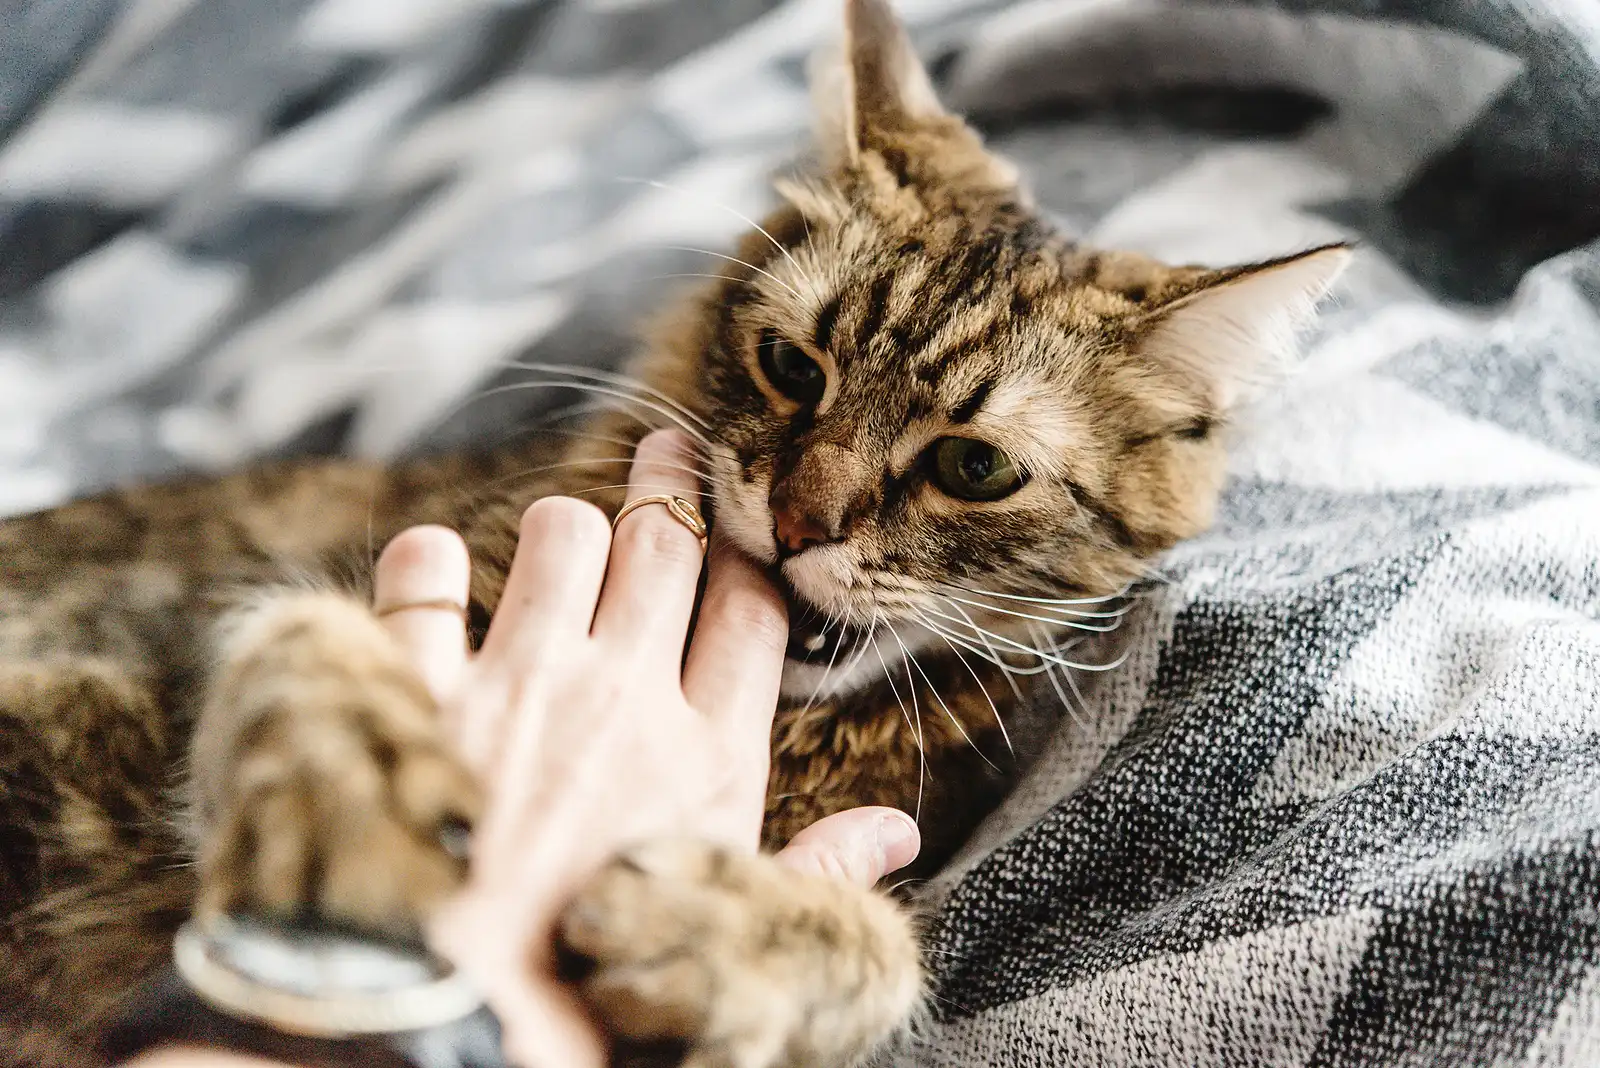 The Correct Way To Stop Your Cat’s Bad Behaviors